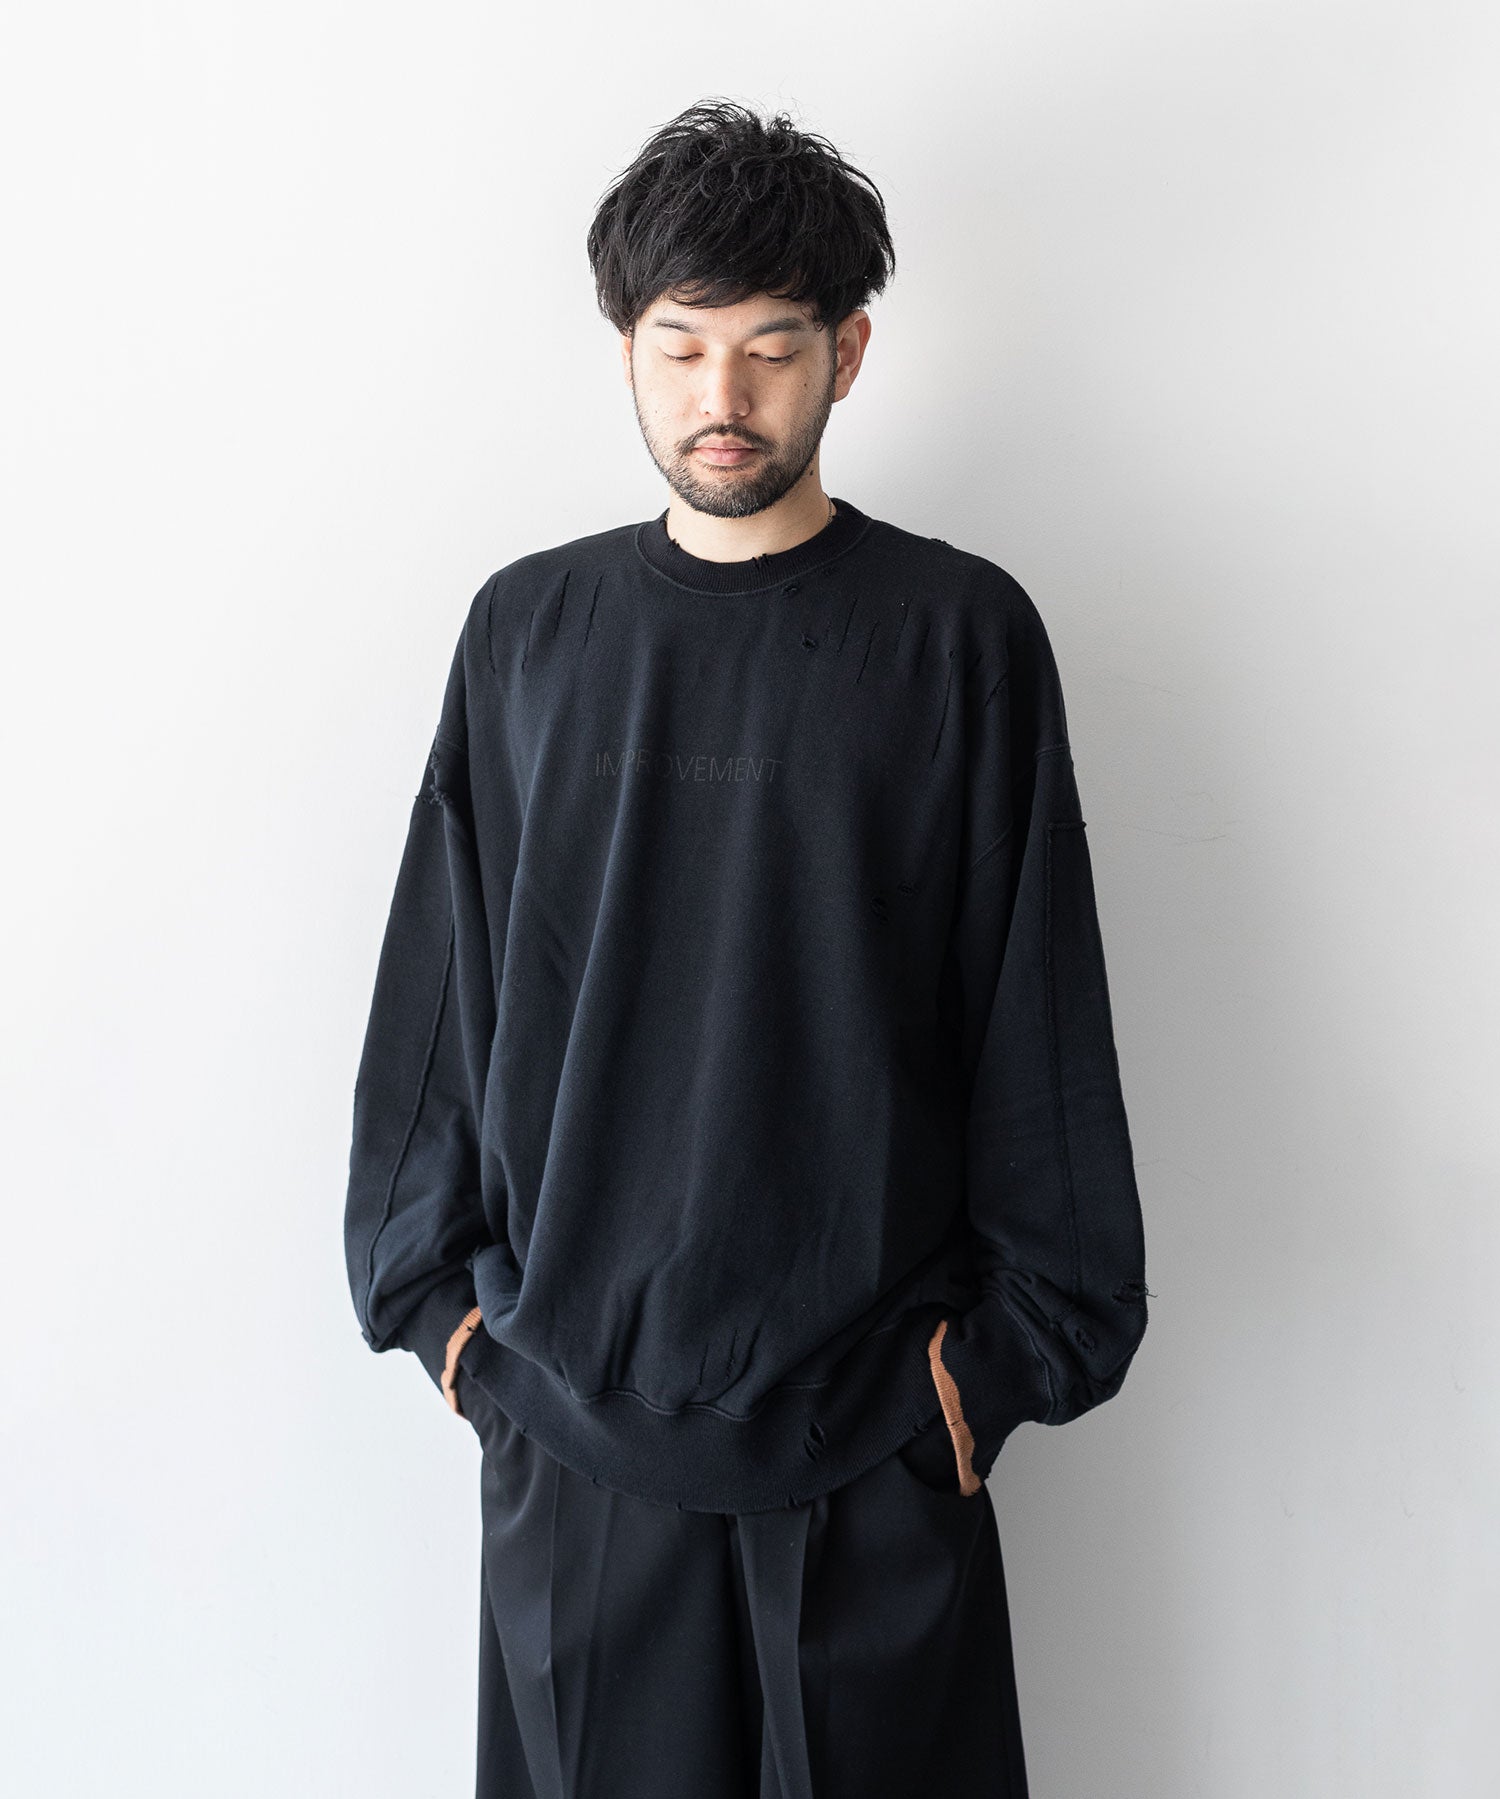 stein 19aw 予約品 スウェット